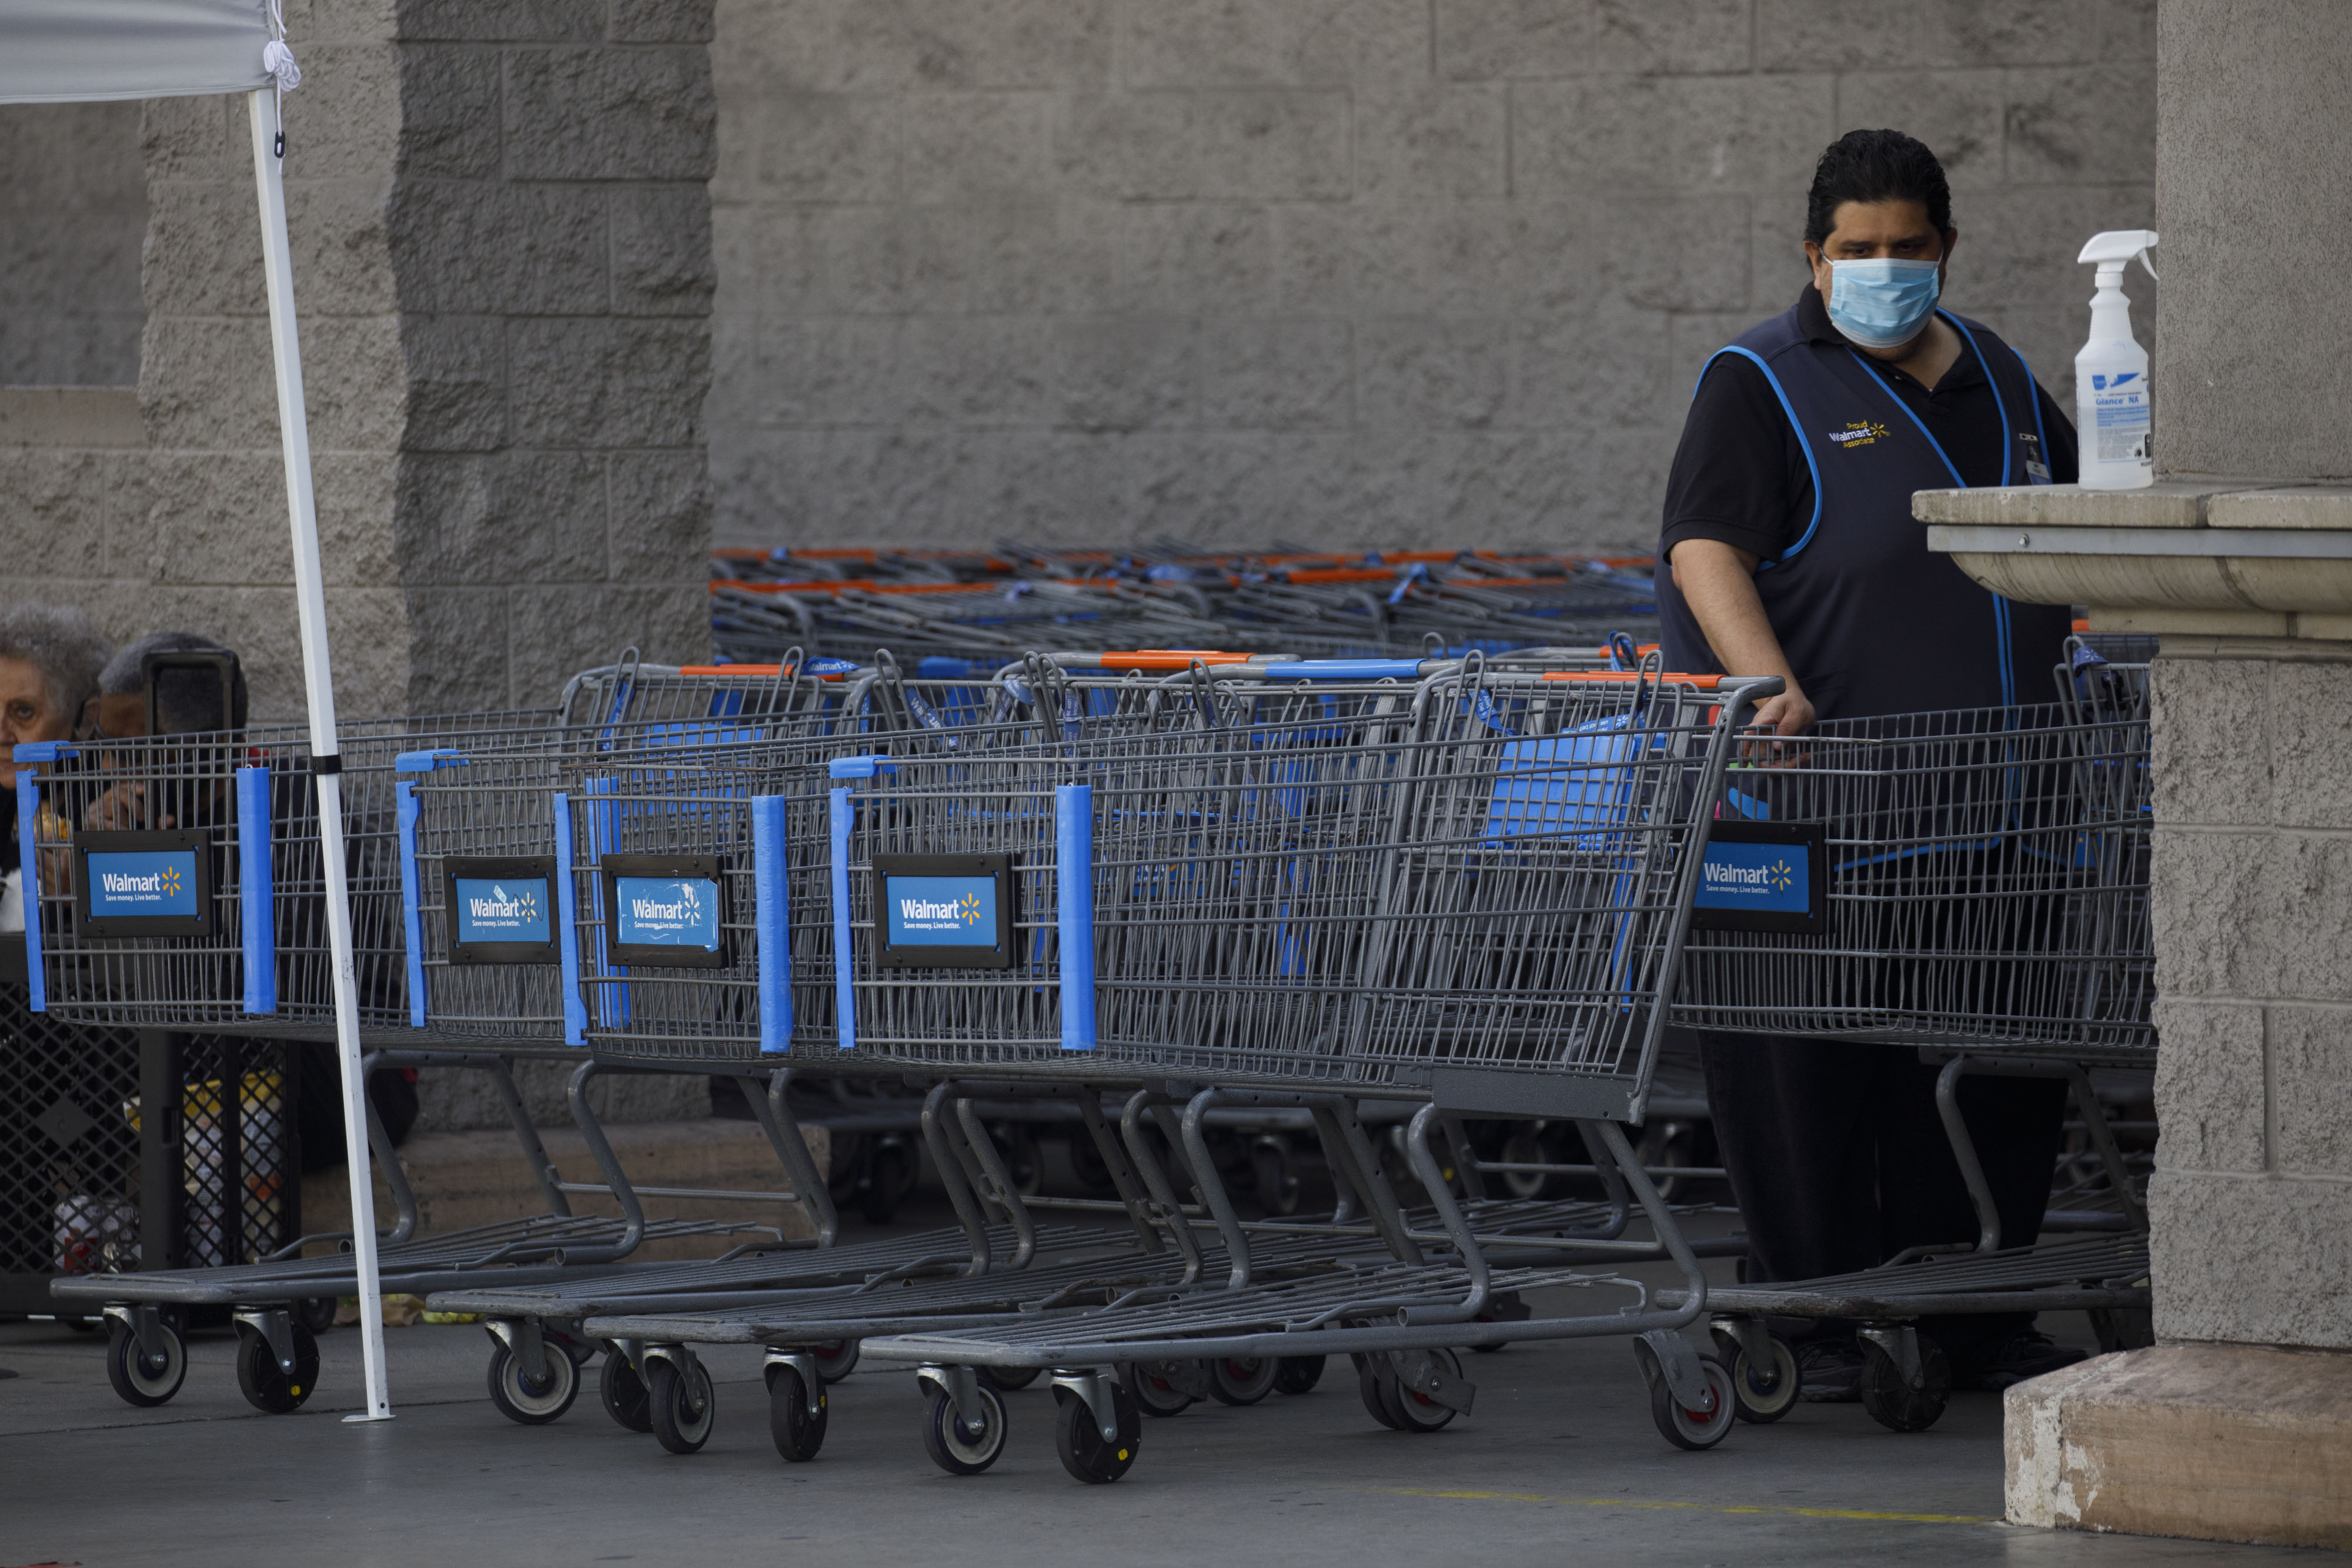 An employee cleans shopping carts outside of a Walmart in Torrance, California, on May 19, 2020.